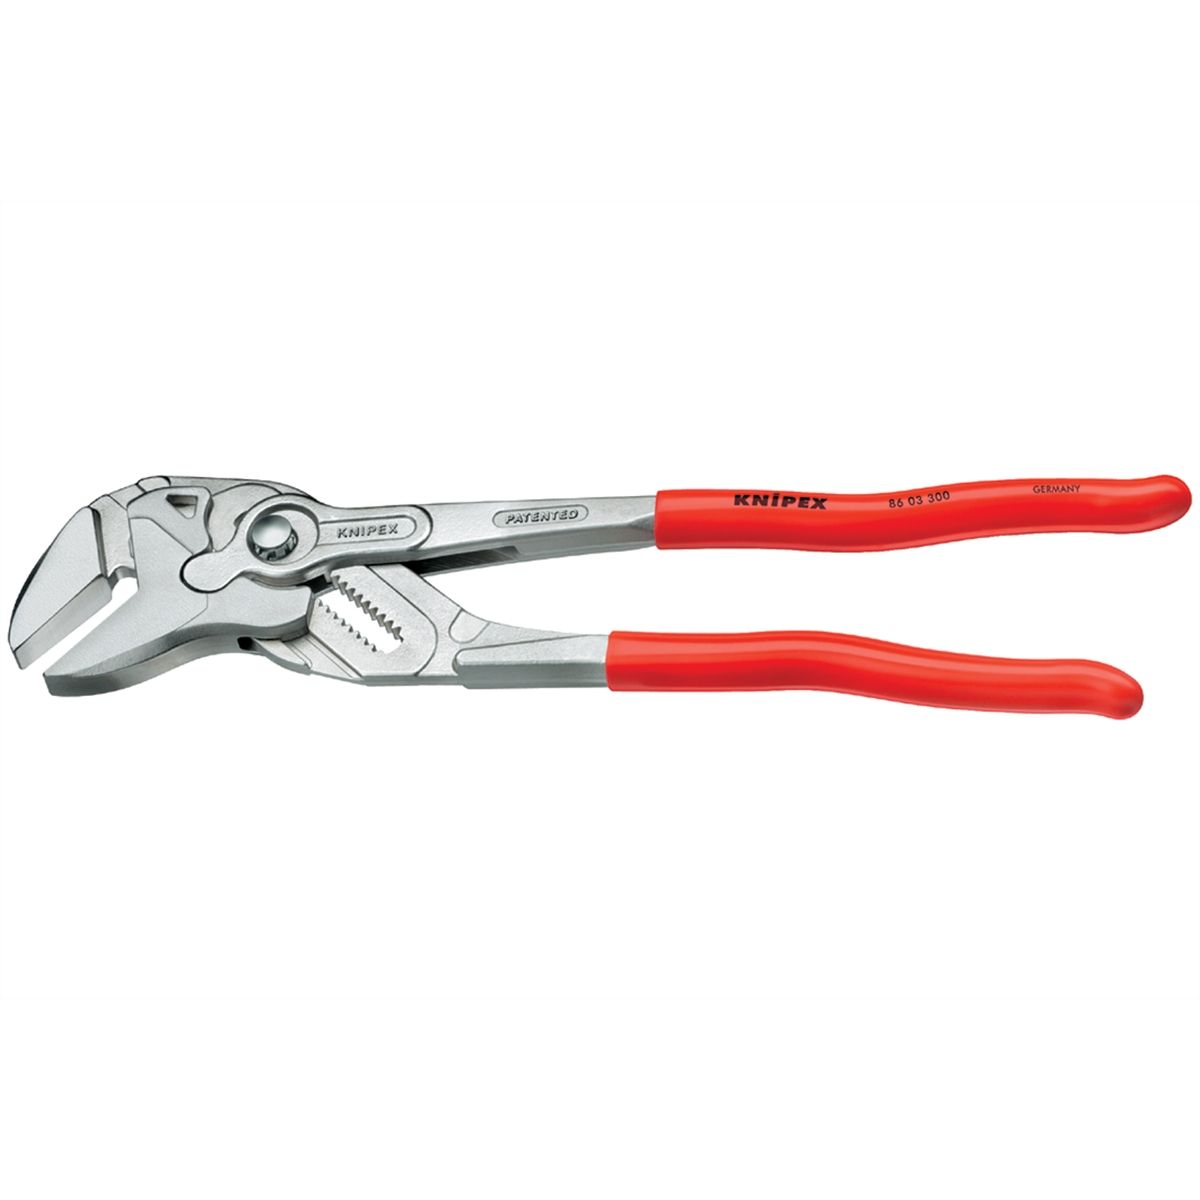 Knipex Pliers Wrench 12 86 01 300